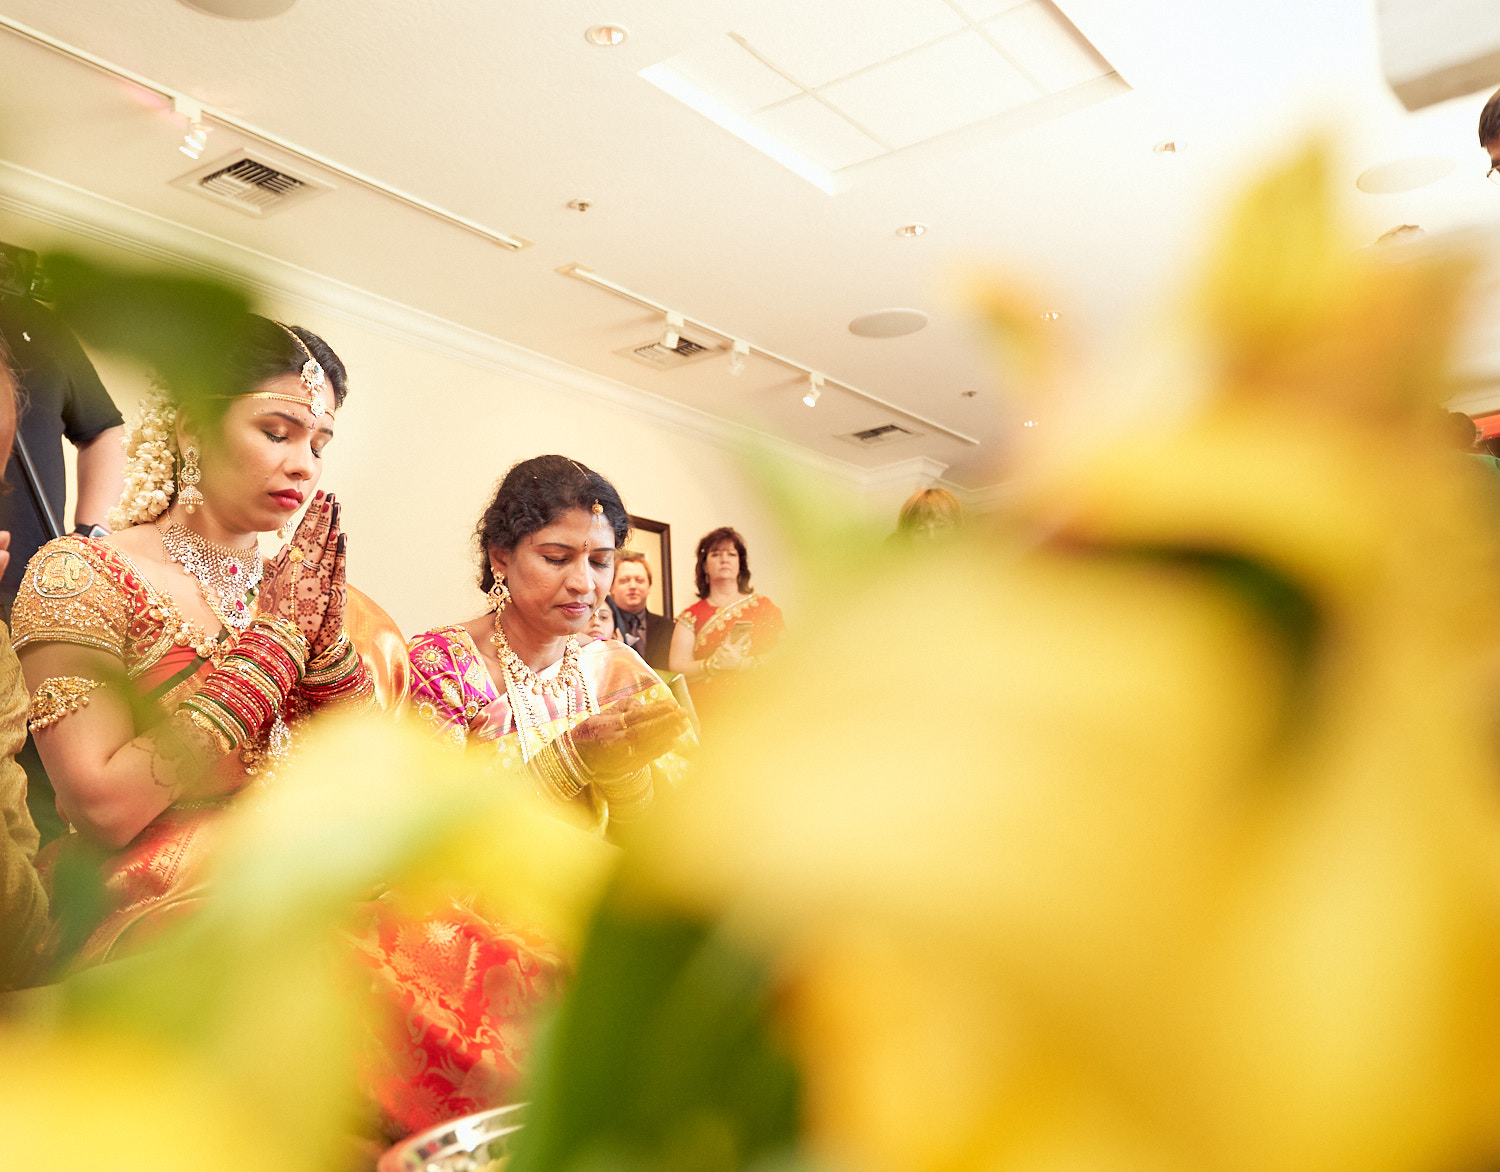 south-indian-wedding-ceremony-photography-by-afewgoodclicks-net-in-saratoga 38.jpg